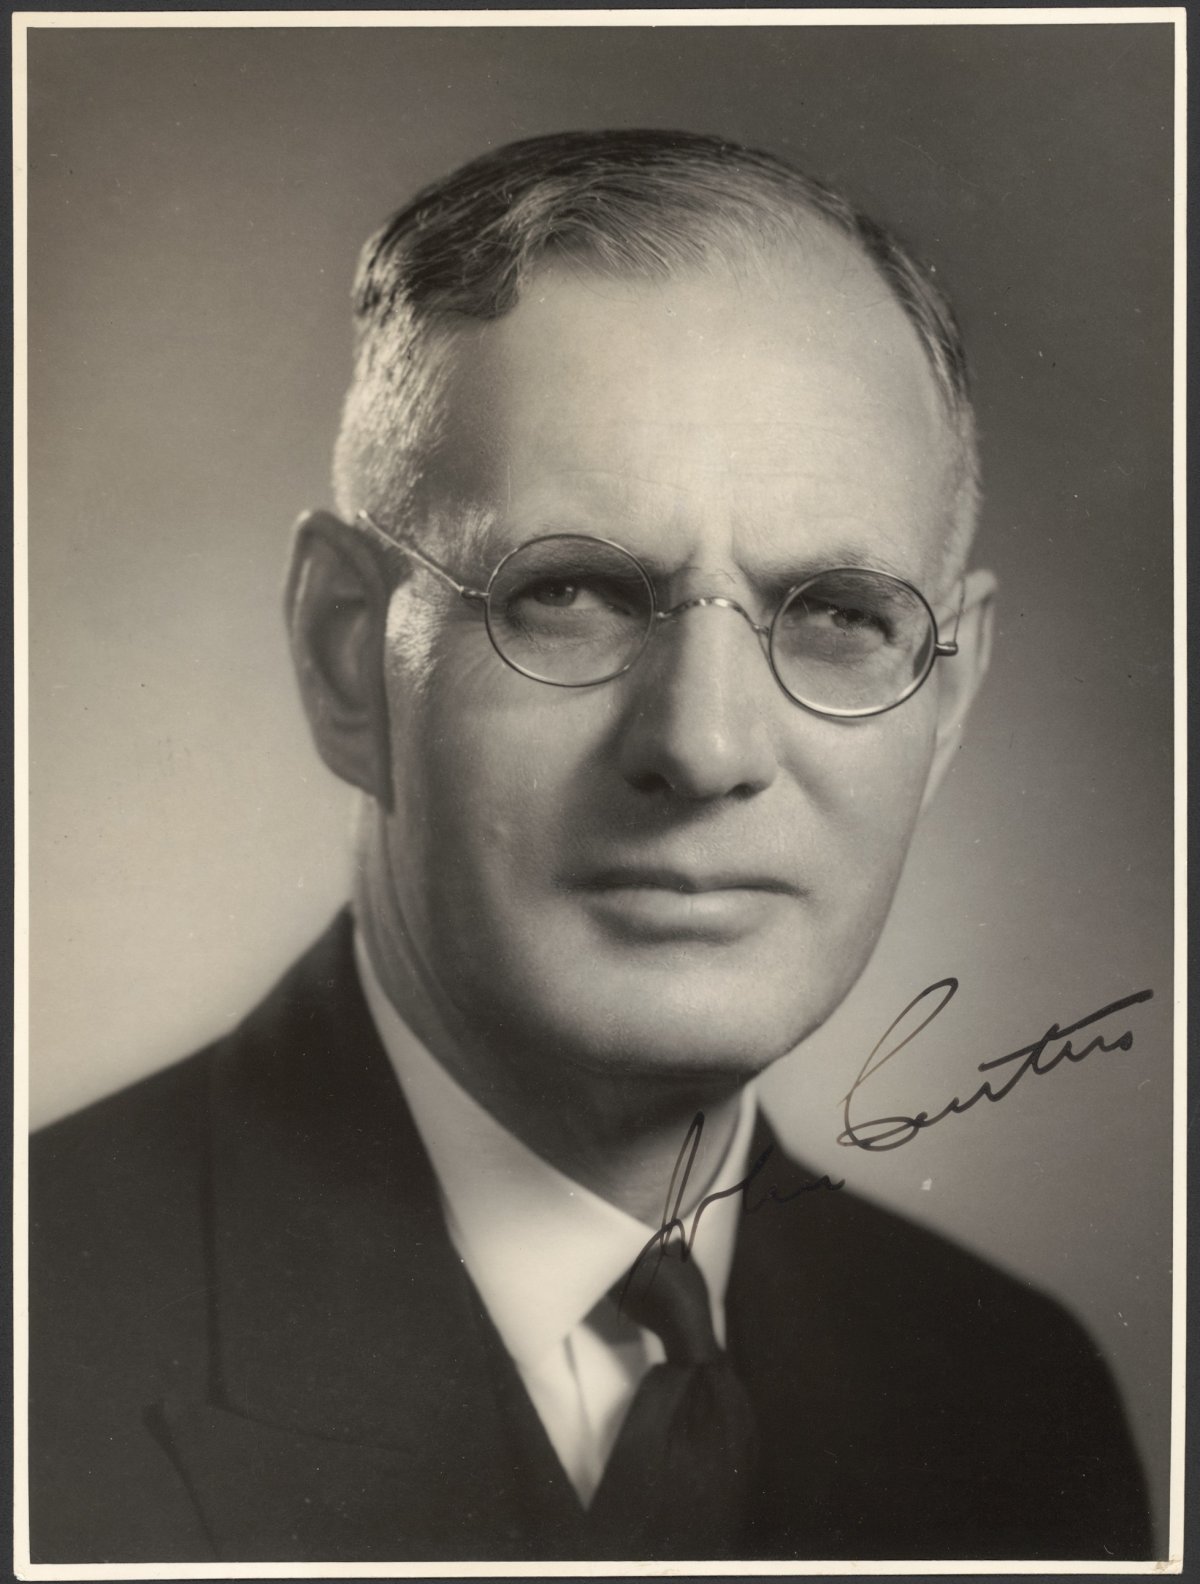 An official portrait of Australian Prime Minister John Curtain. He is a middle-aged white male wearing wire rimmed glasses. He has thinning blonde hair swept back neatly. He is wearing a dark suit and tie with a white collared shirt. He is staring directly at the camera with a stern look. In the lower right quadrant of the photograph is Curtains signature.